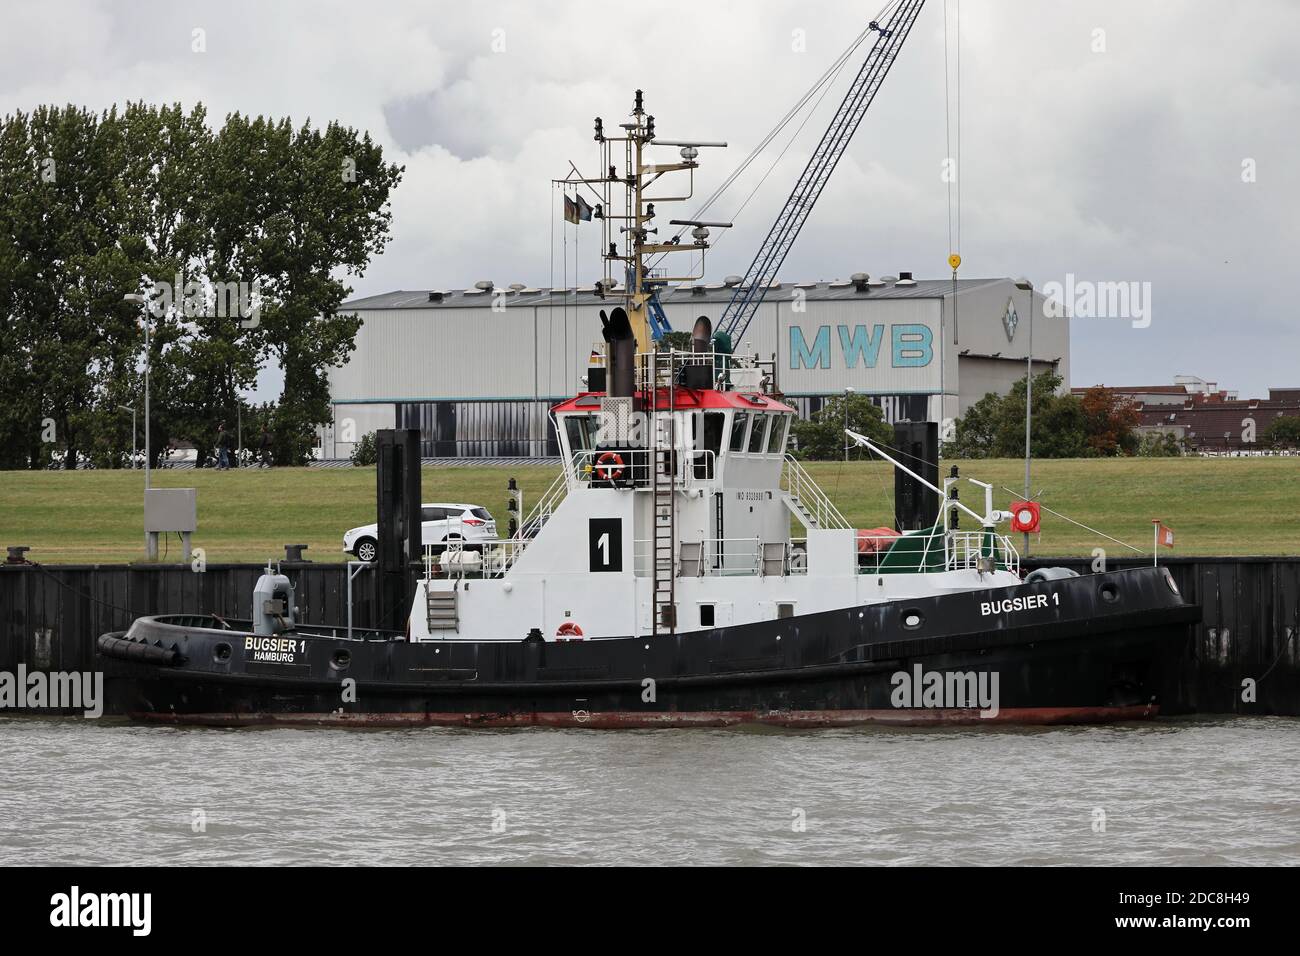 The port tug Bugsier 1 will be in Bremerhaven on August 24, 2020 on the Weser at the pier. Stock Photo